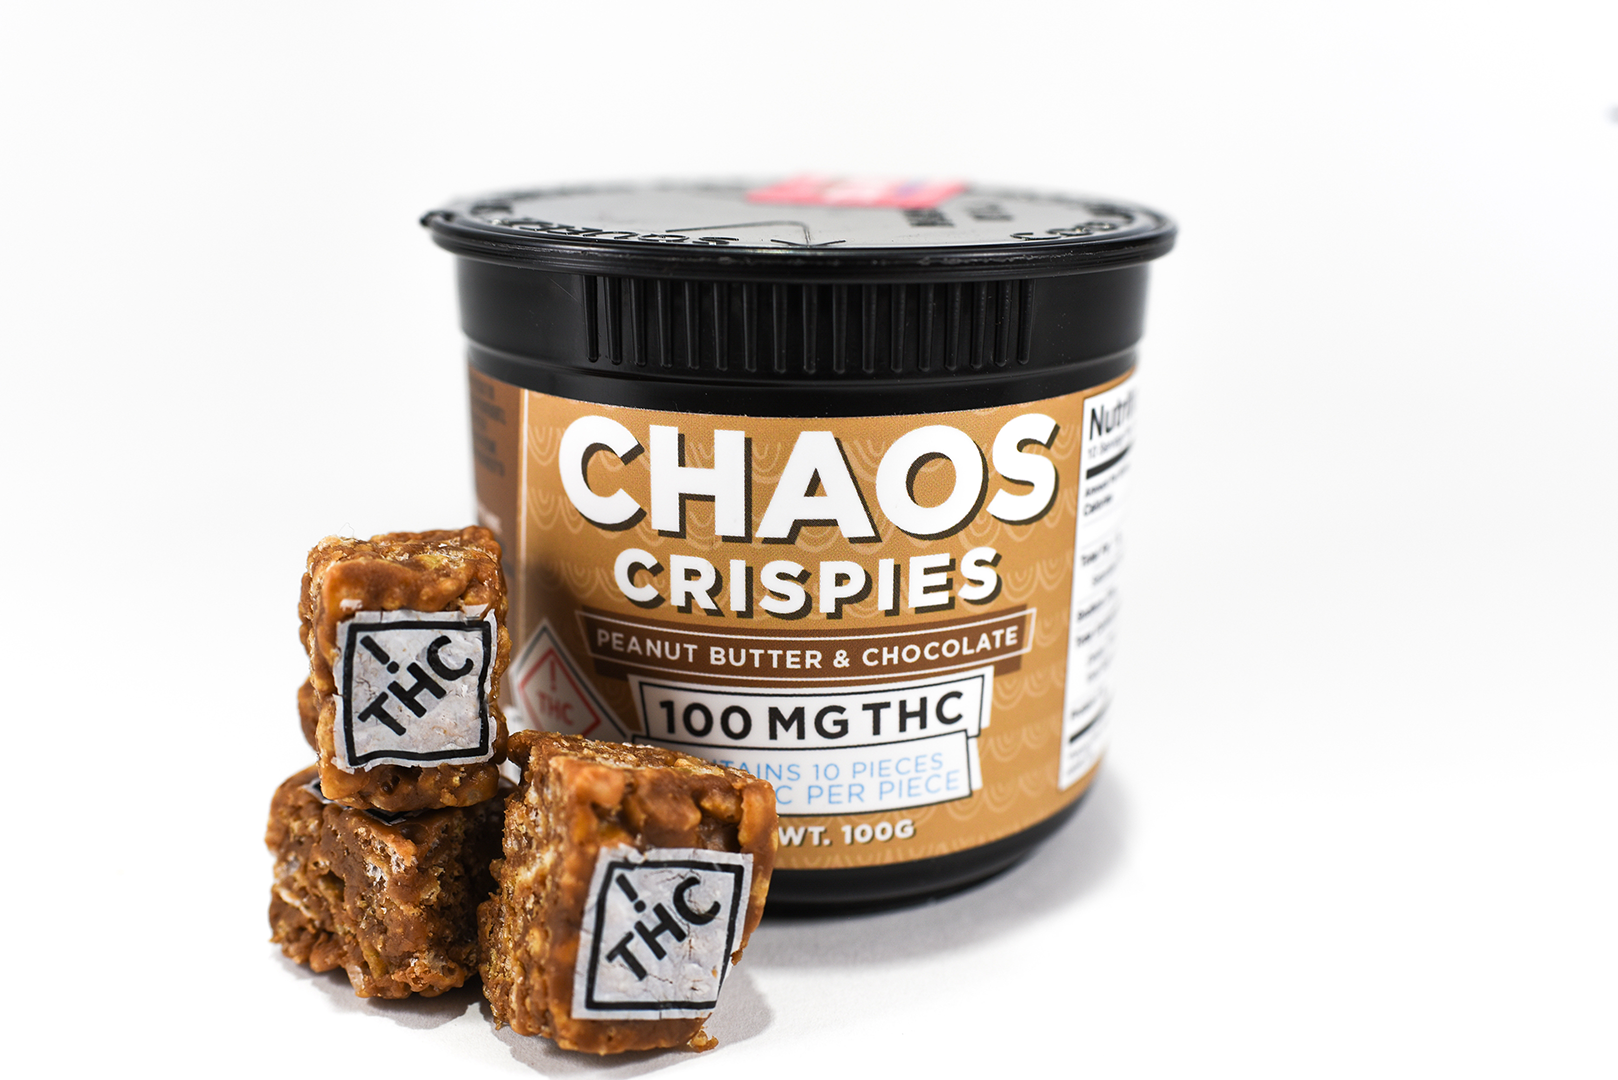 chocolate rice crispy squares with white ! thc diamond symbols imprinted on them next to a container that says "CHAOS CRISPIES"